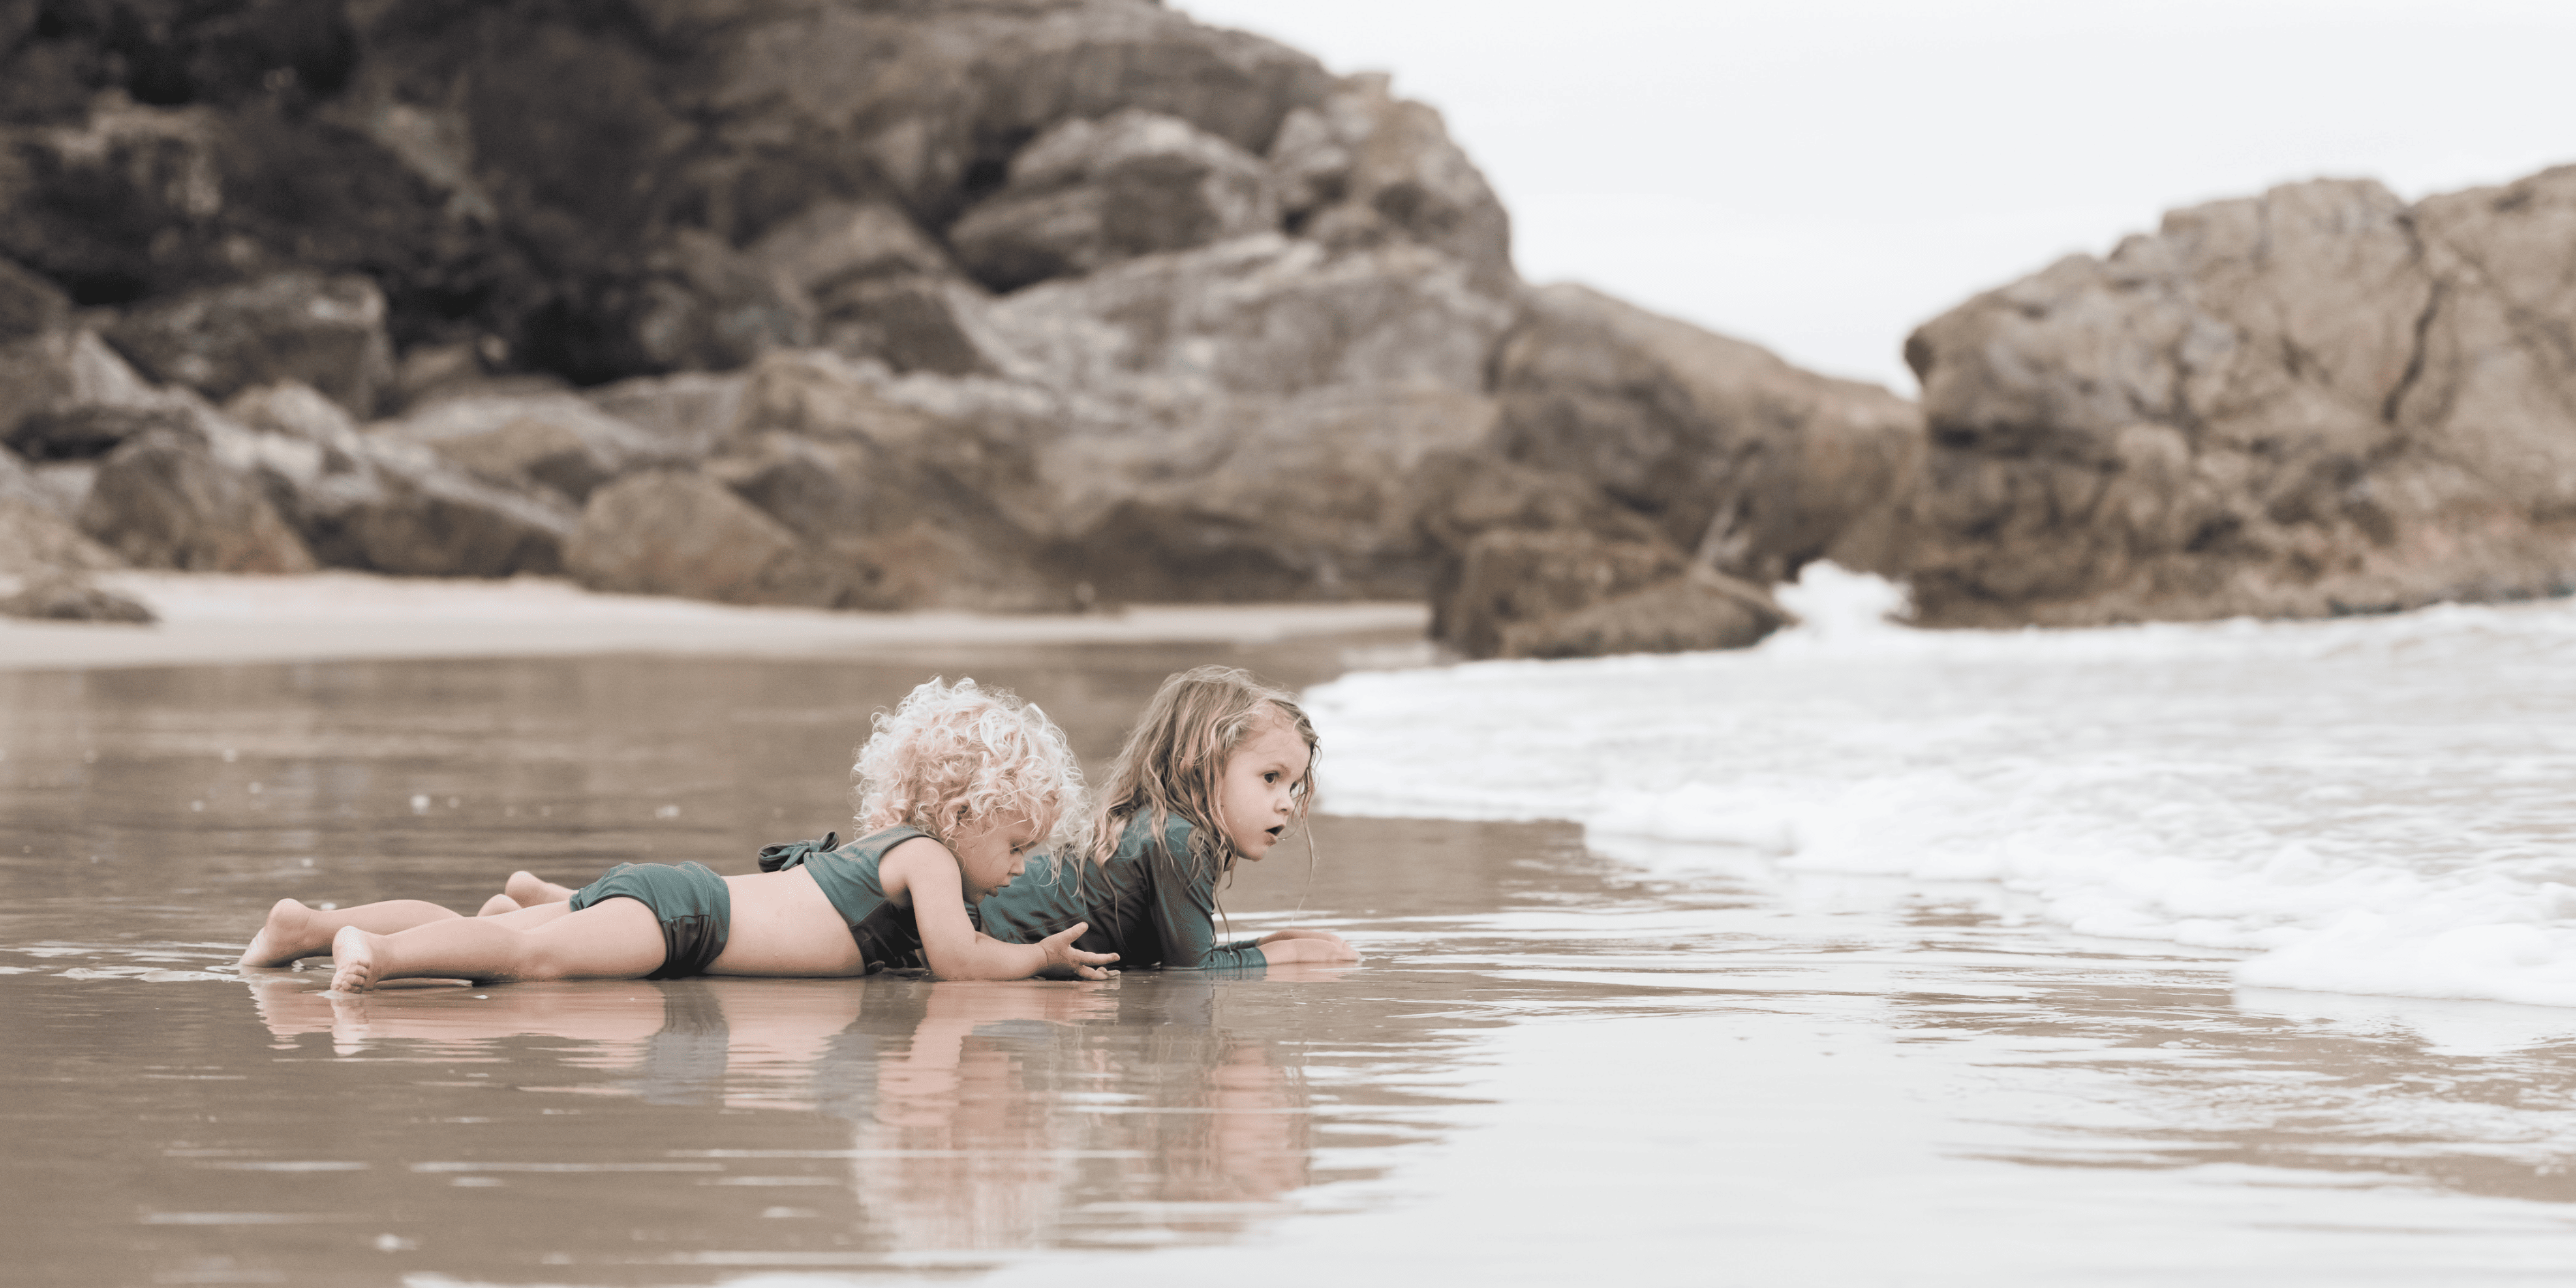 Two eco-friendly children laying on the beach with rocks in the background.